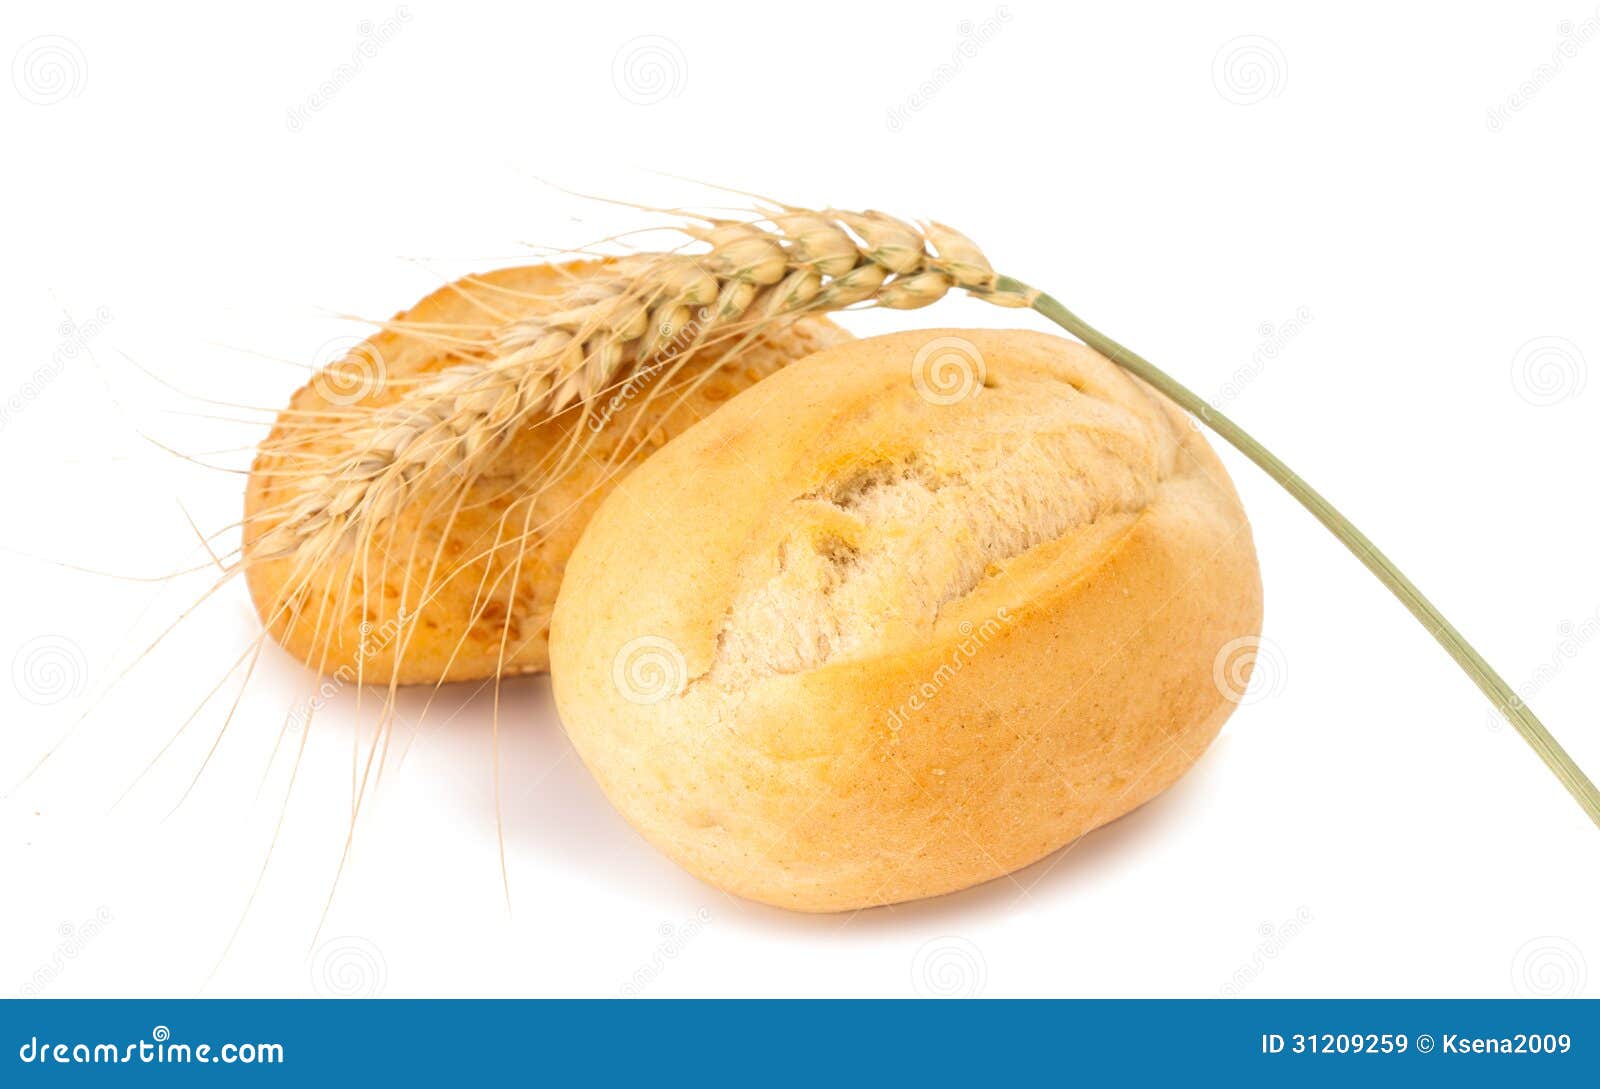 French bread rolls isolated on white background